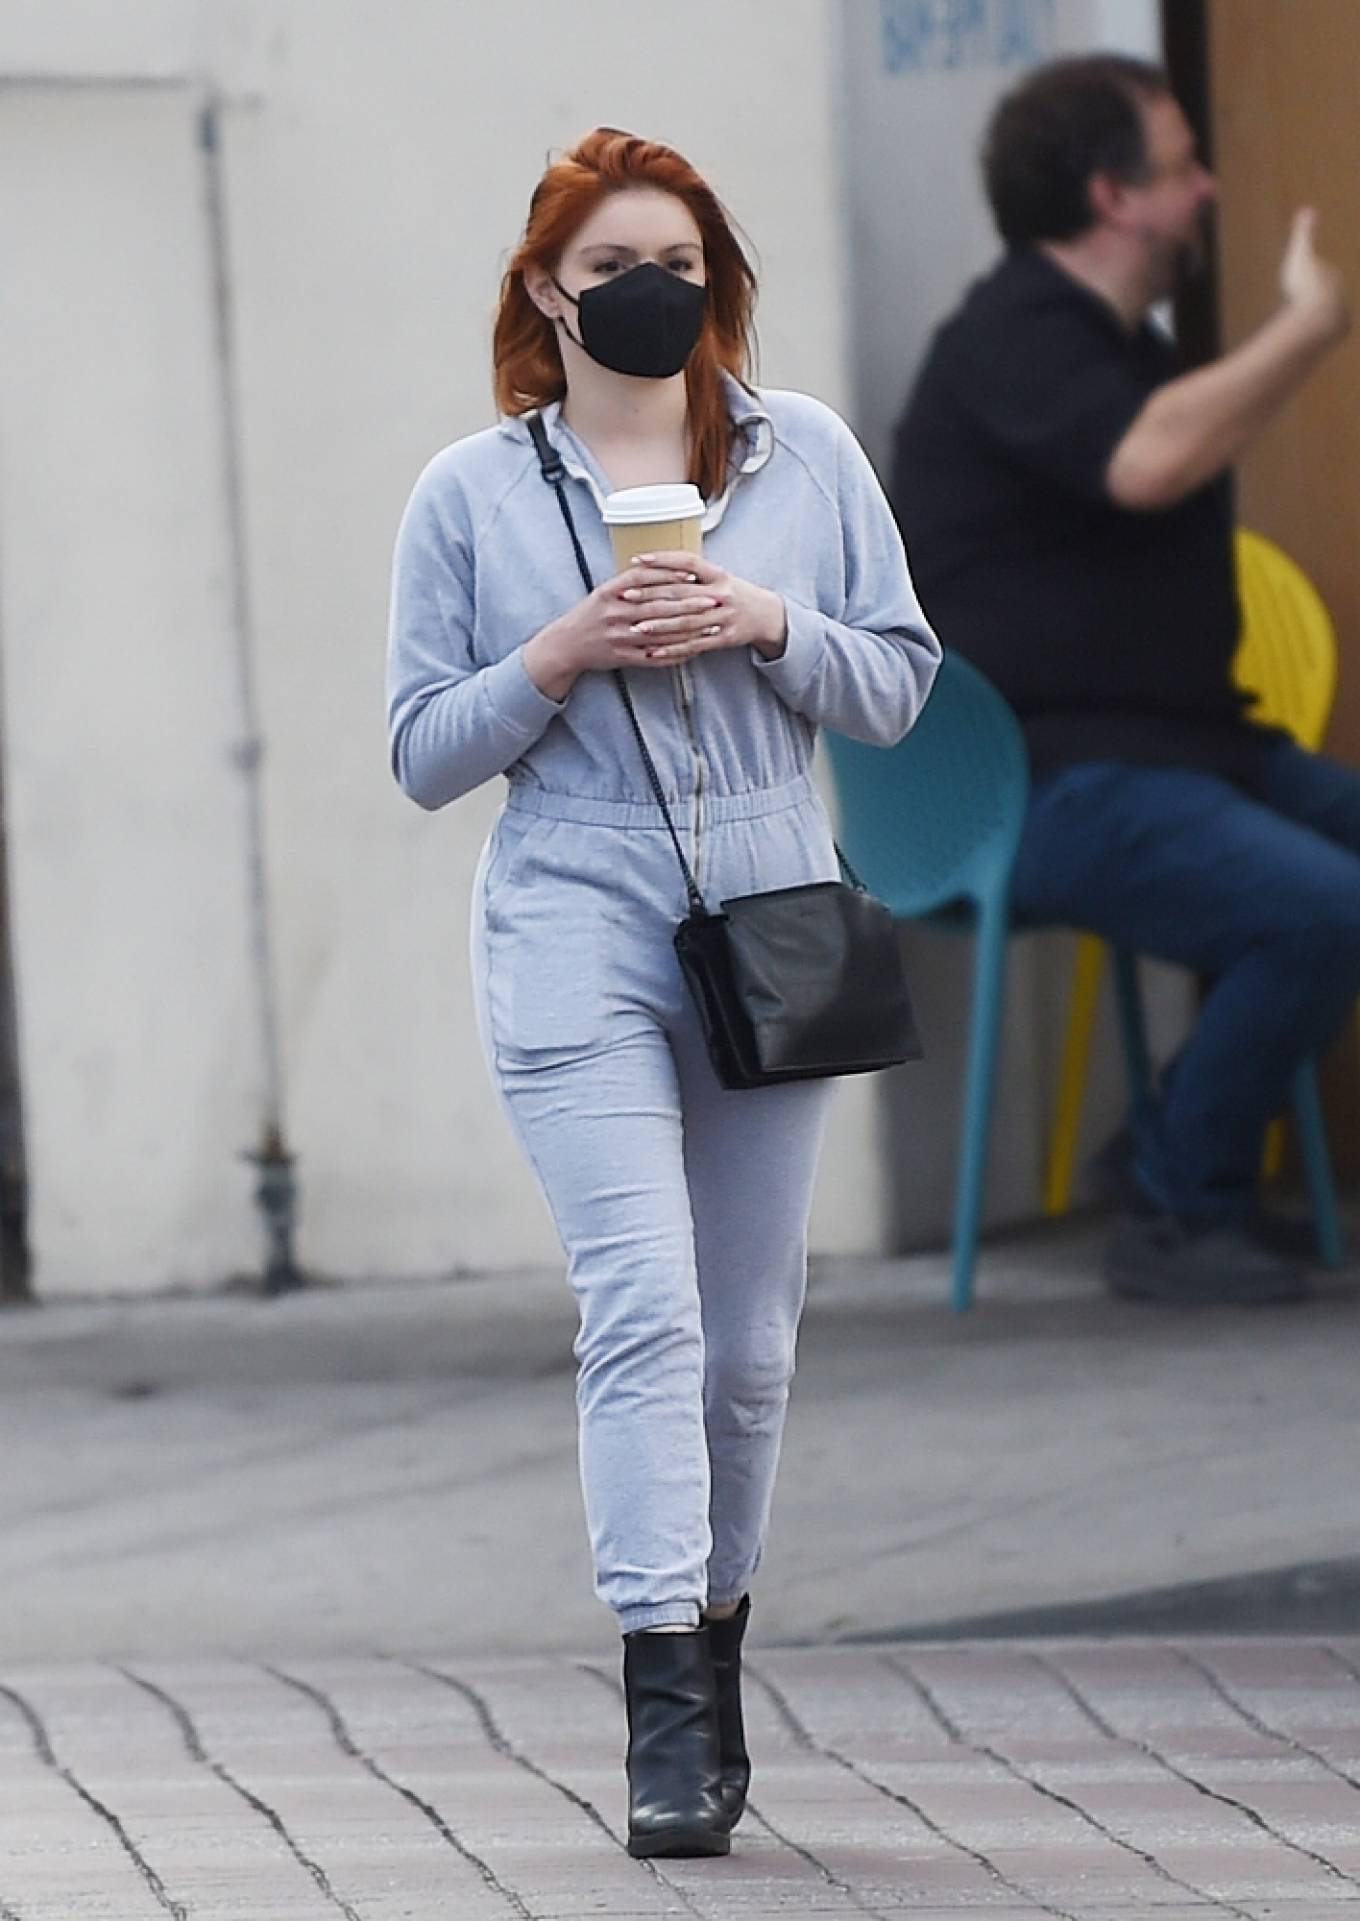 Ariel Winter 2021 : Ariel Winter – Grabs a cup of coffee in West Hollywood-05